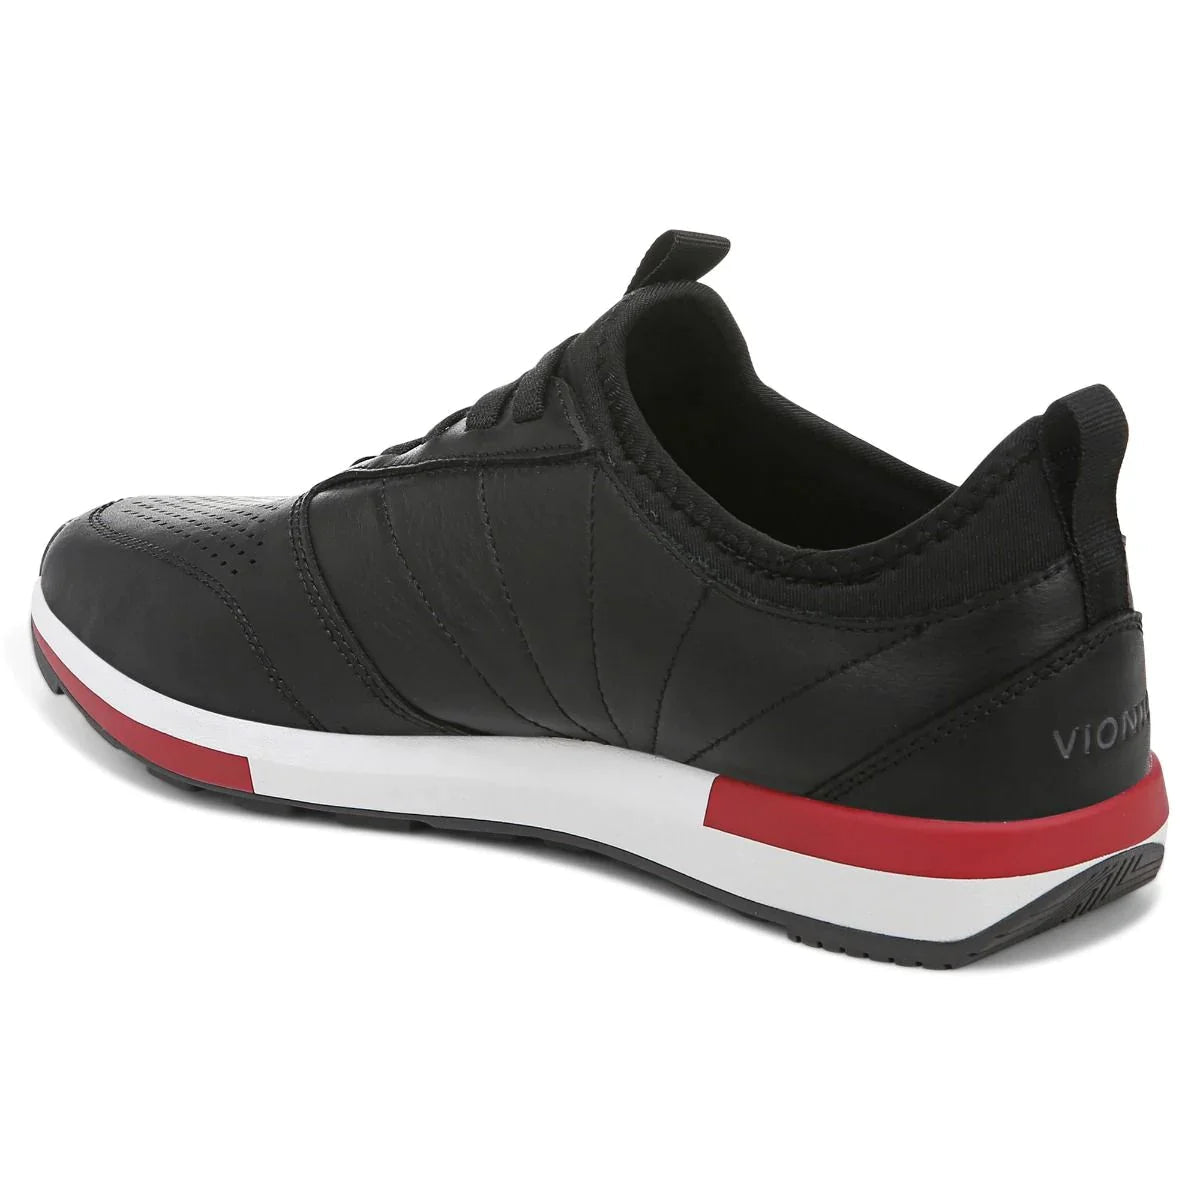 Trent Sneaker - The Shoe CollectiveVionic